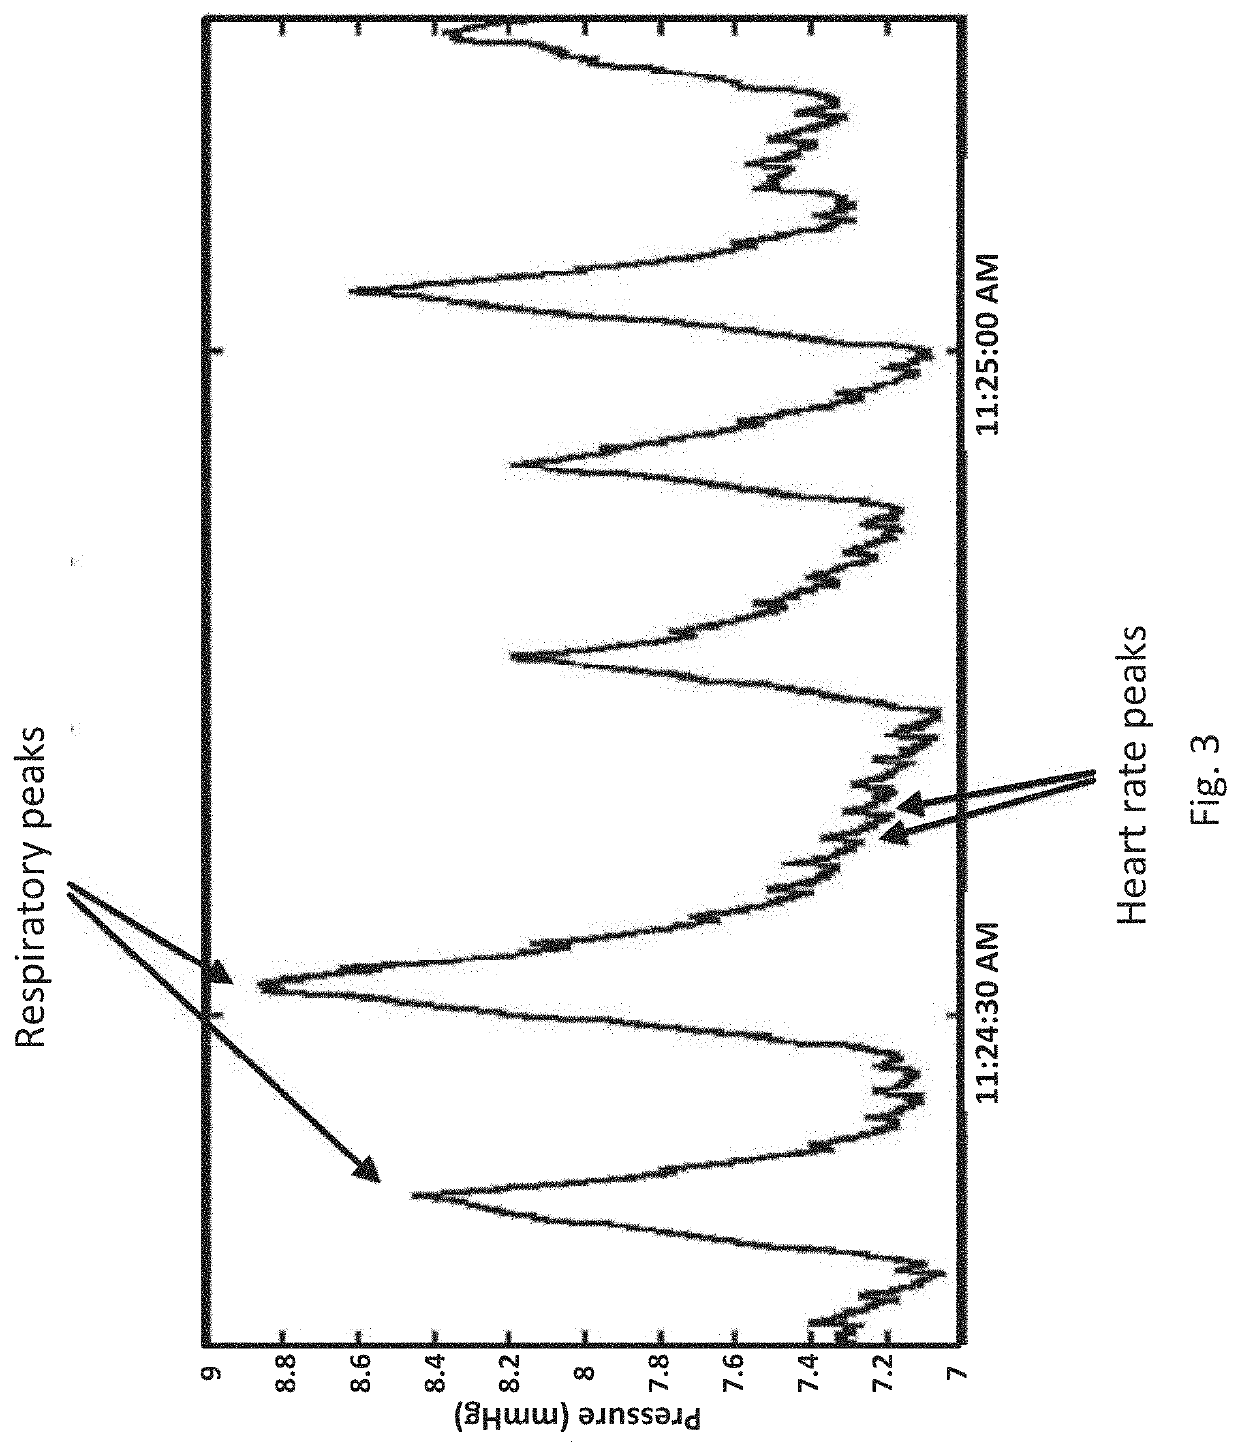 Systems, devices and methods for draining and analyzing bodily fluids and assessing health